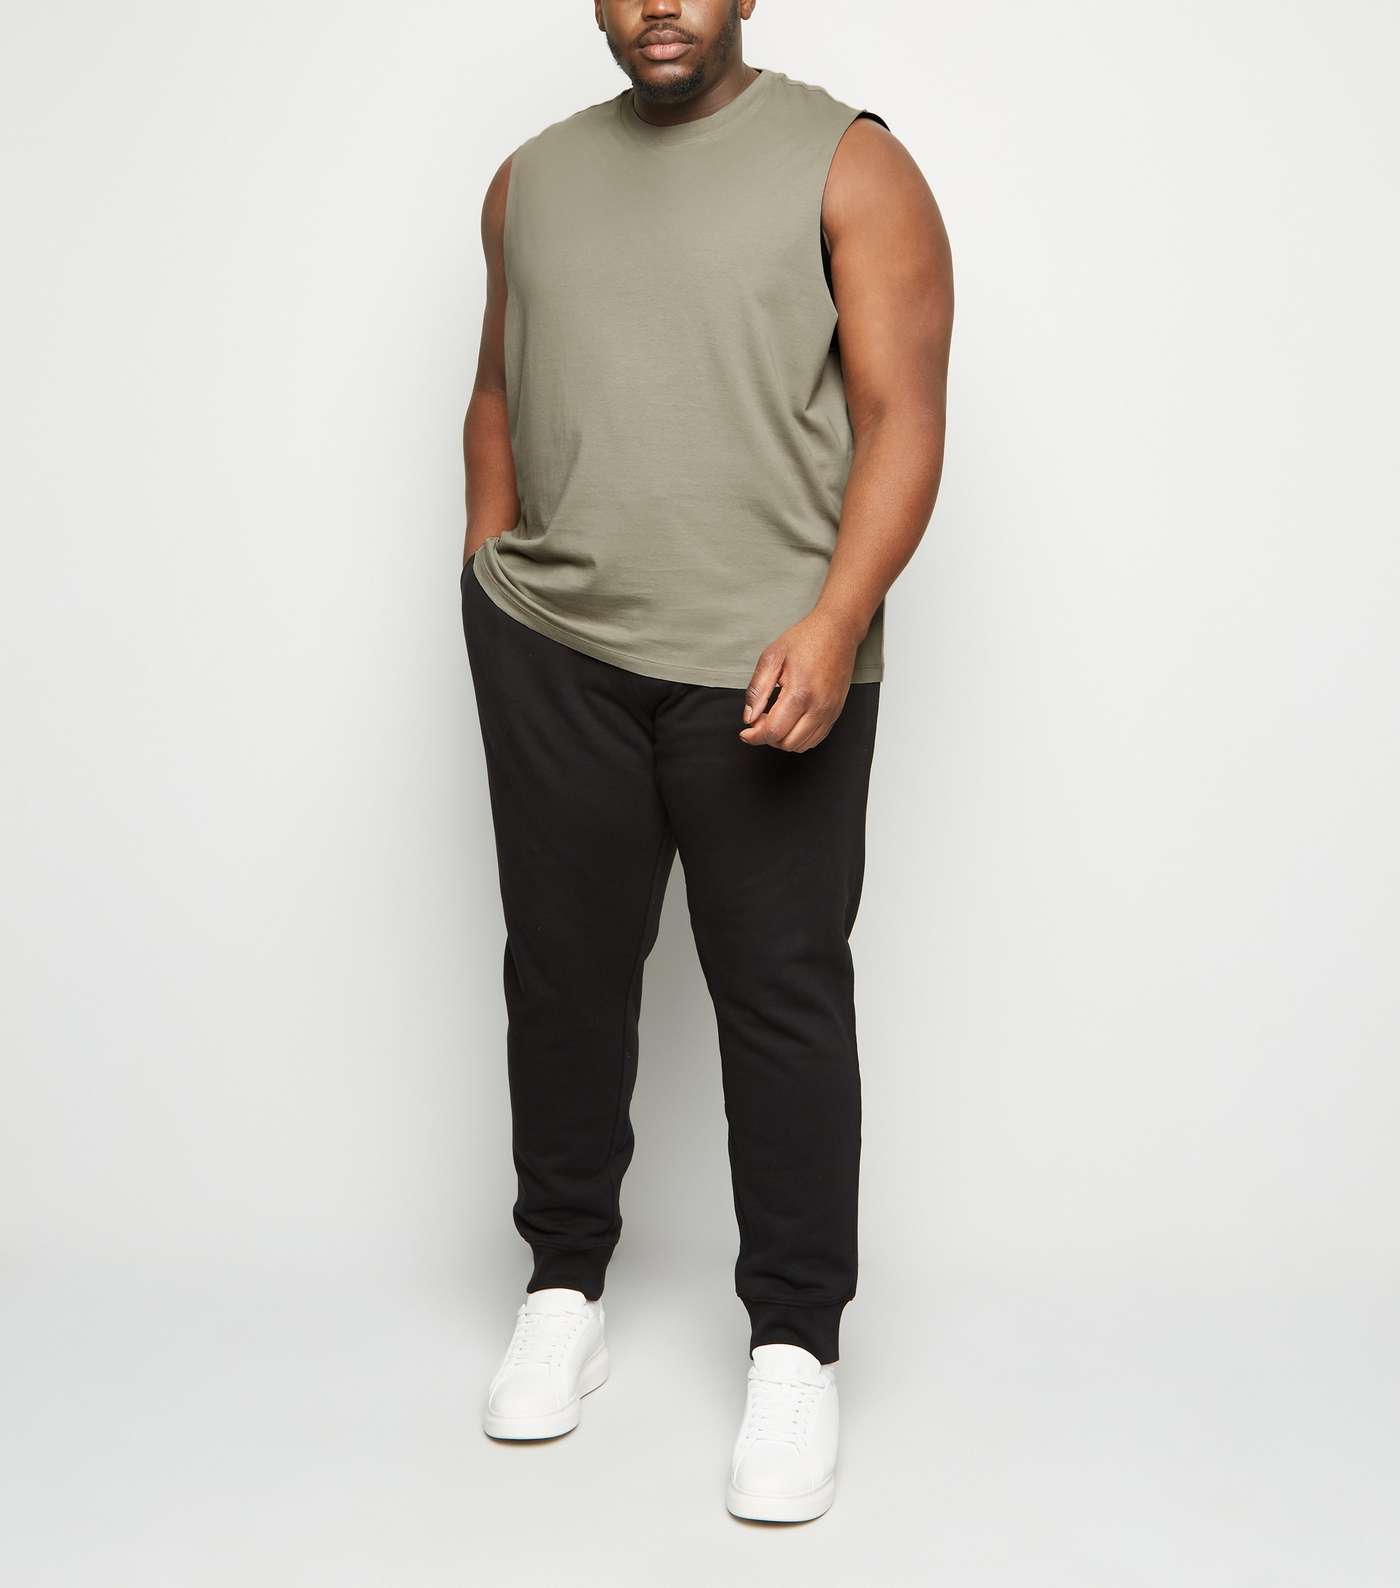 Plus Size Olive Tank Top Image 2